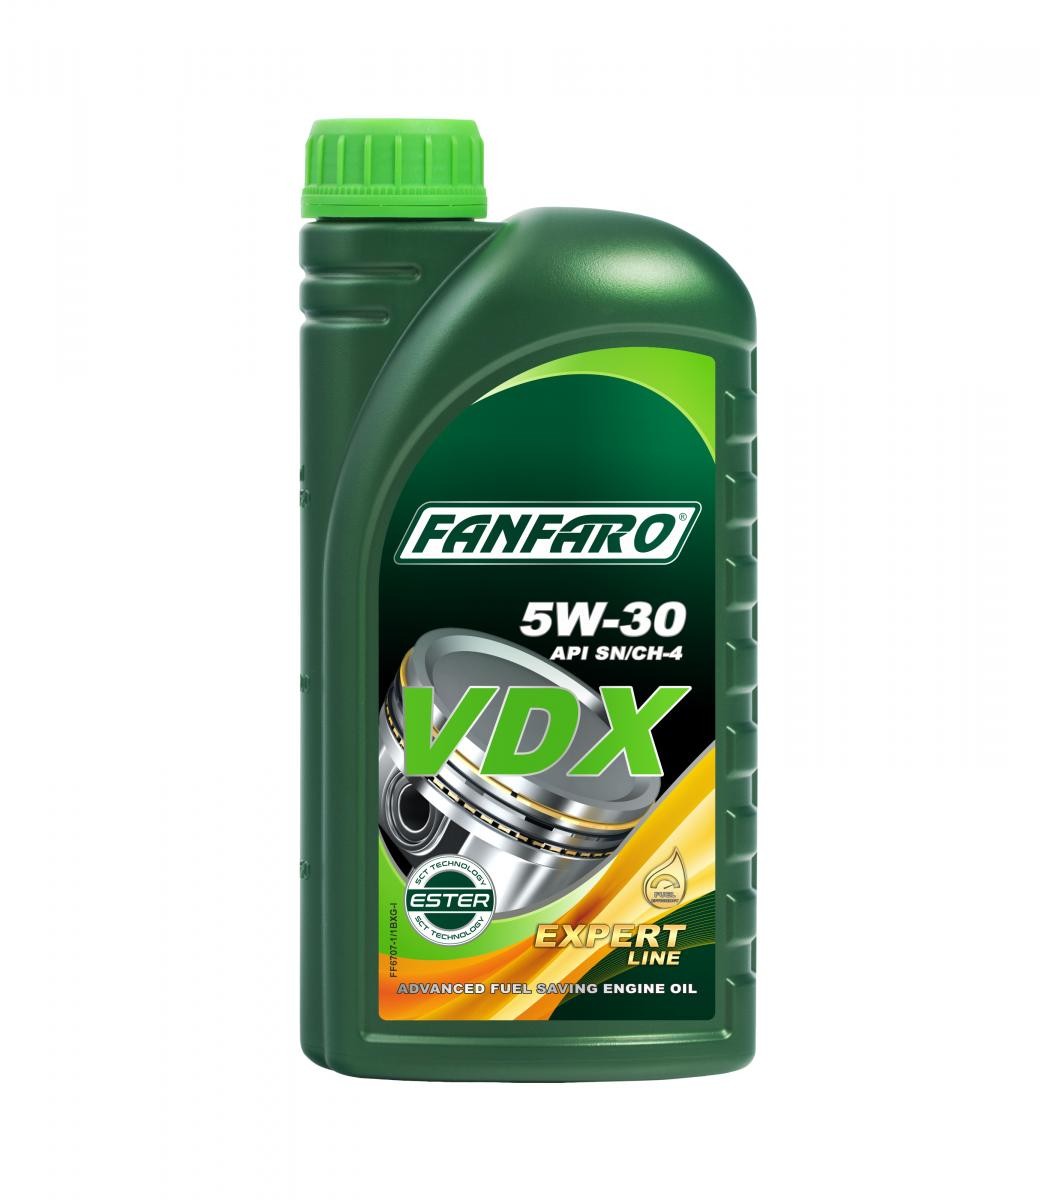 Car engine oil FF6707-1 review